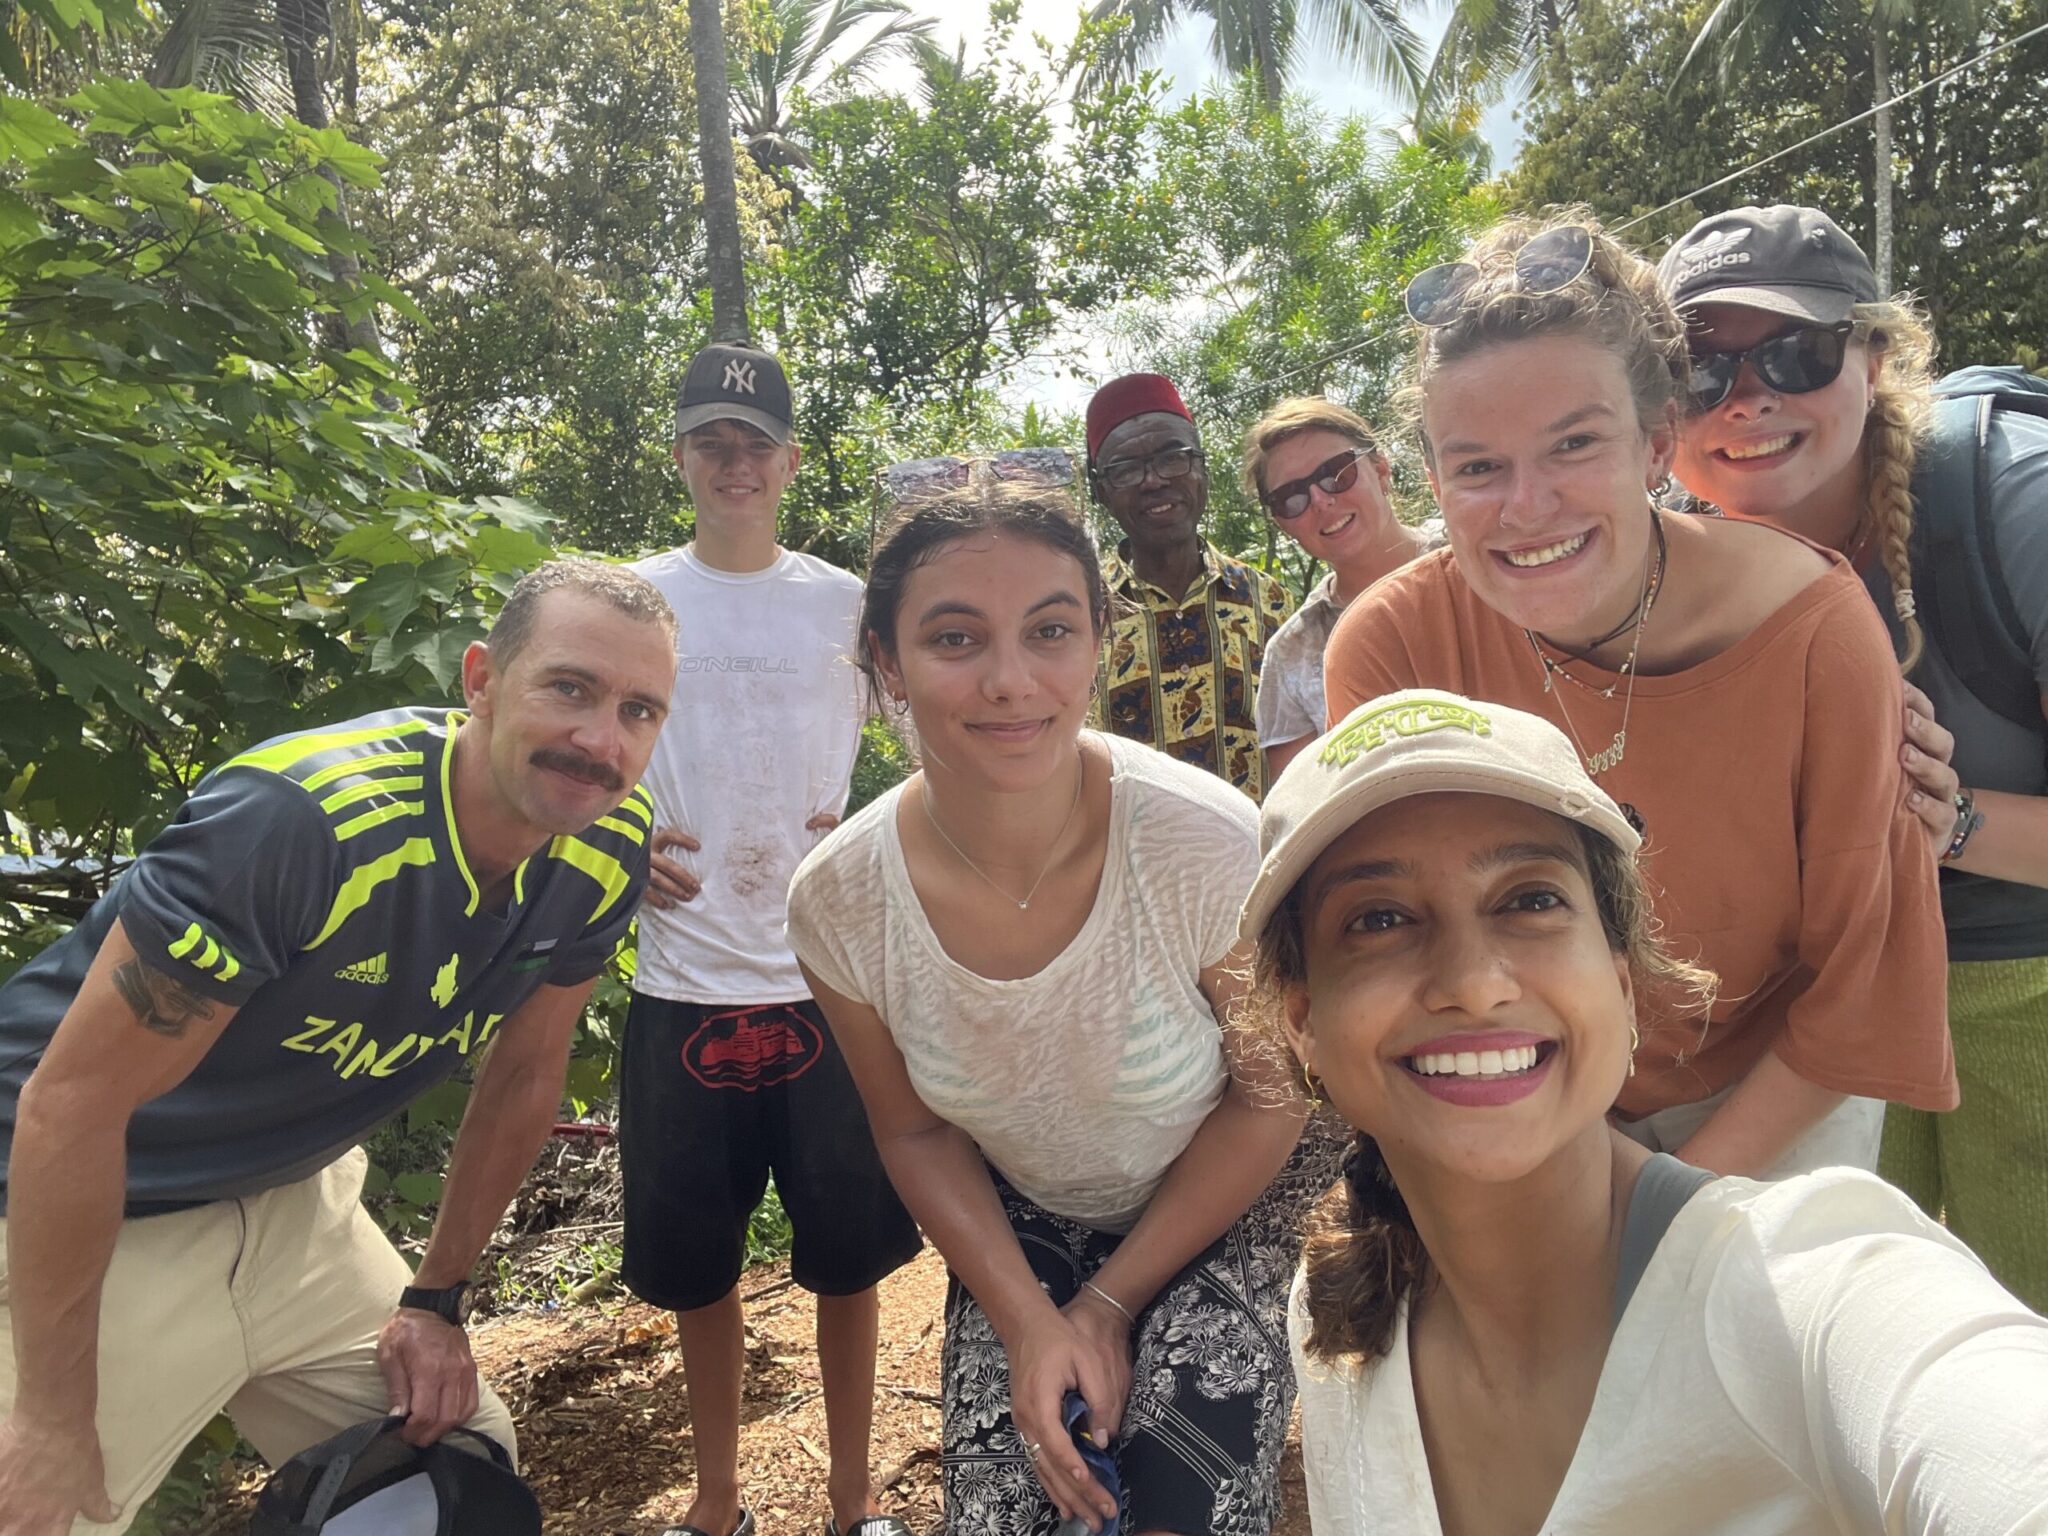 While exploring a jungle area, volunteers gather for a group selfie